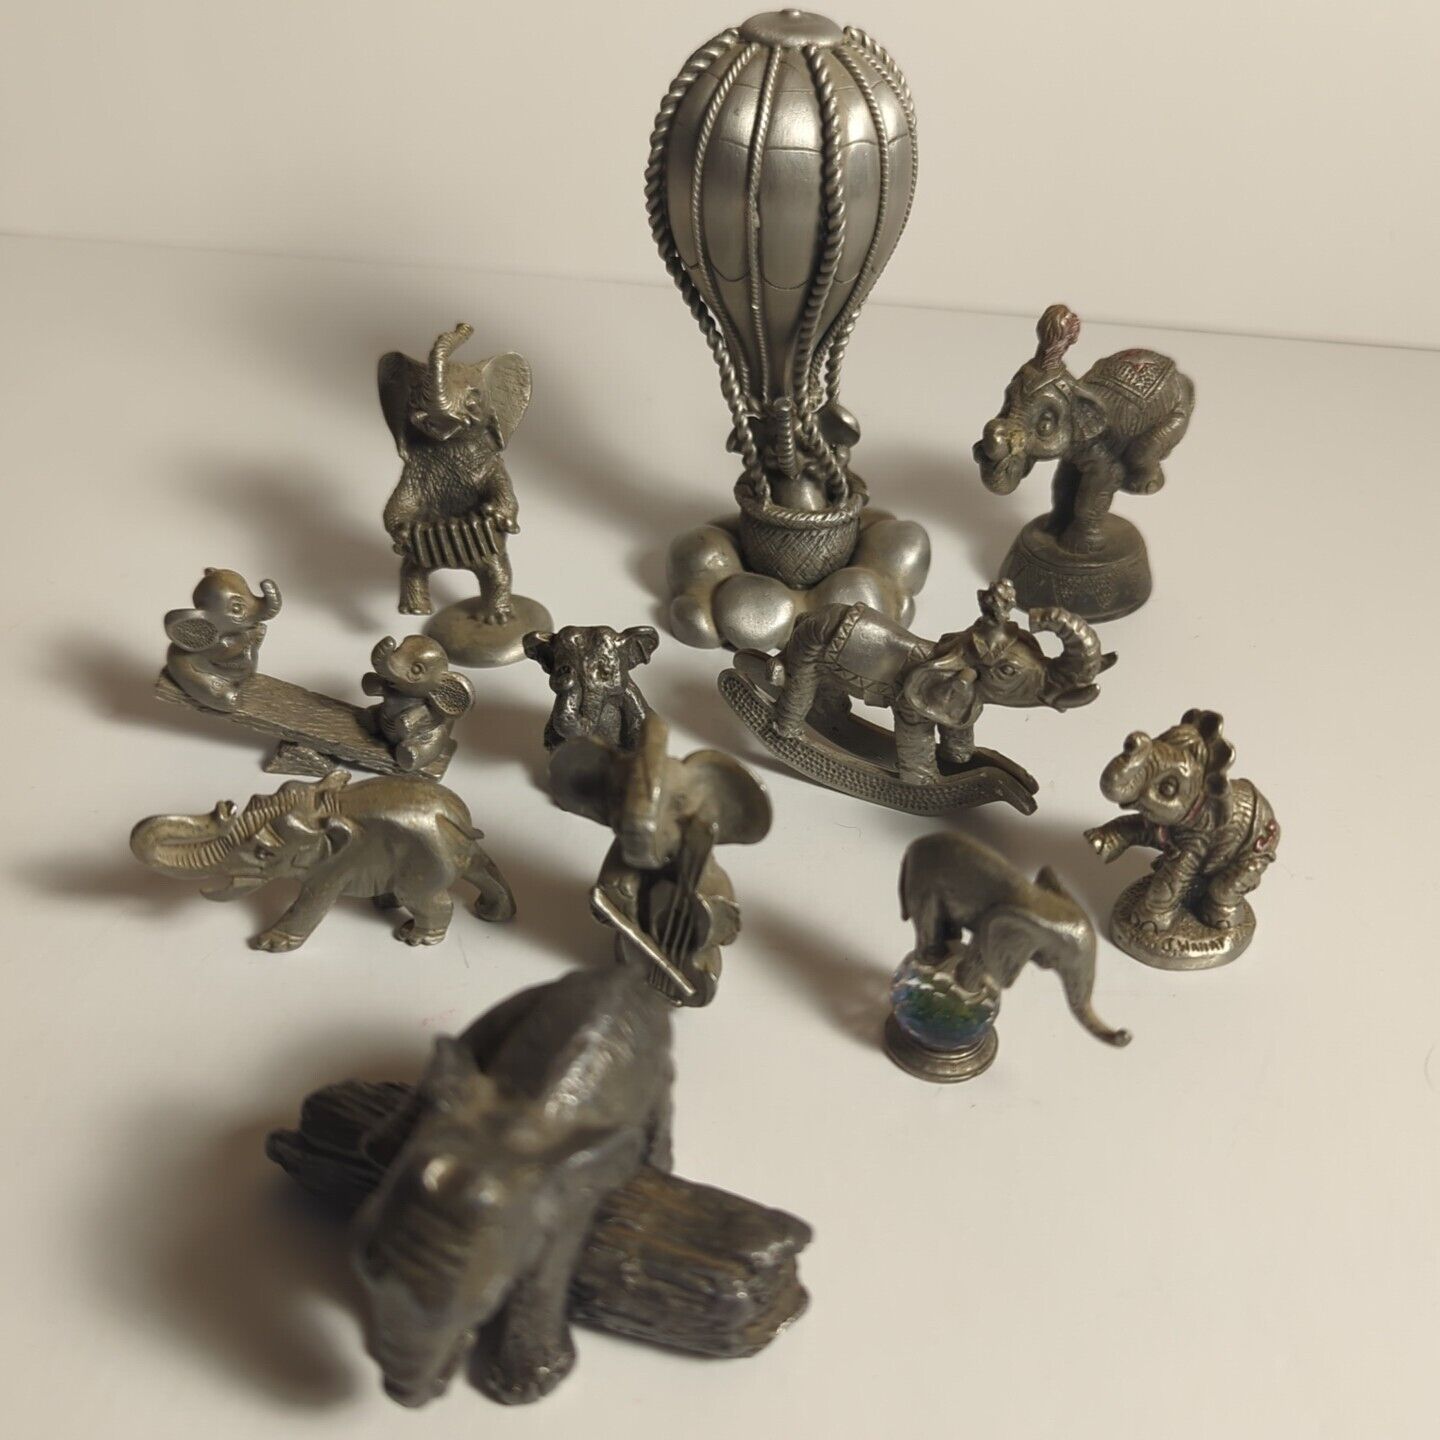 Lot of 11 Pewter Elephants / Elephant Balloon Instruments Circus Log MORE